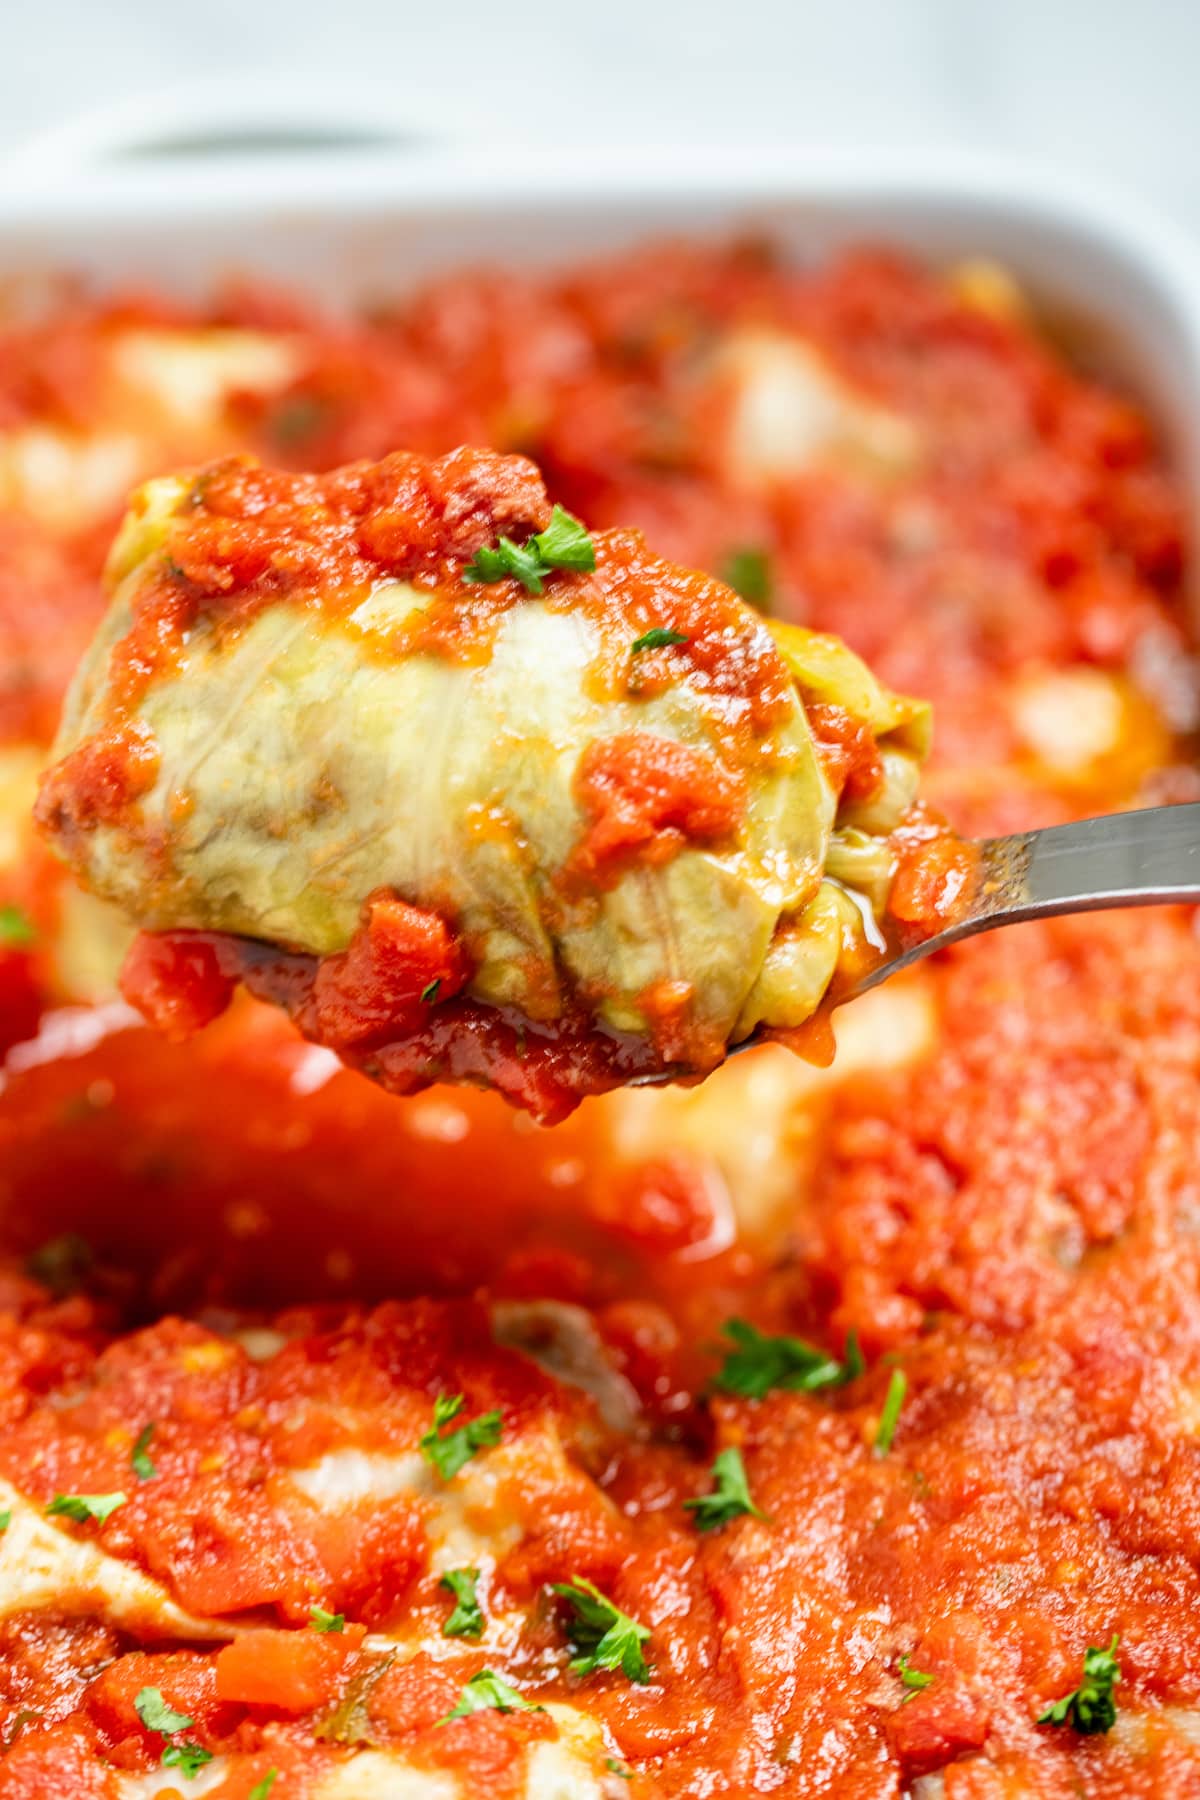 A spoon lifting a stuffed cabbage roll out of a baking dish.